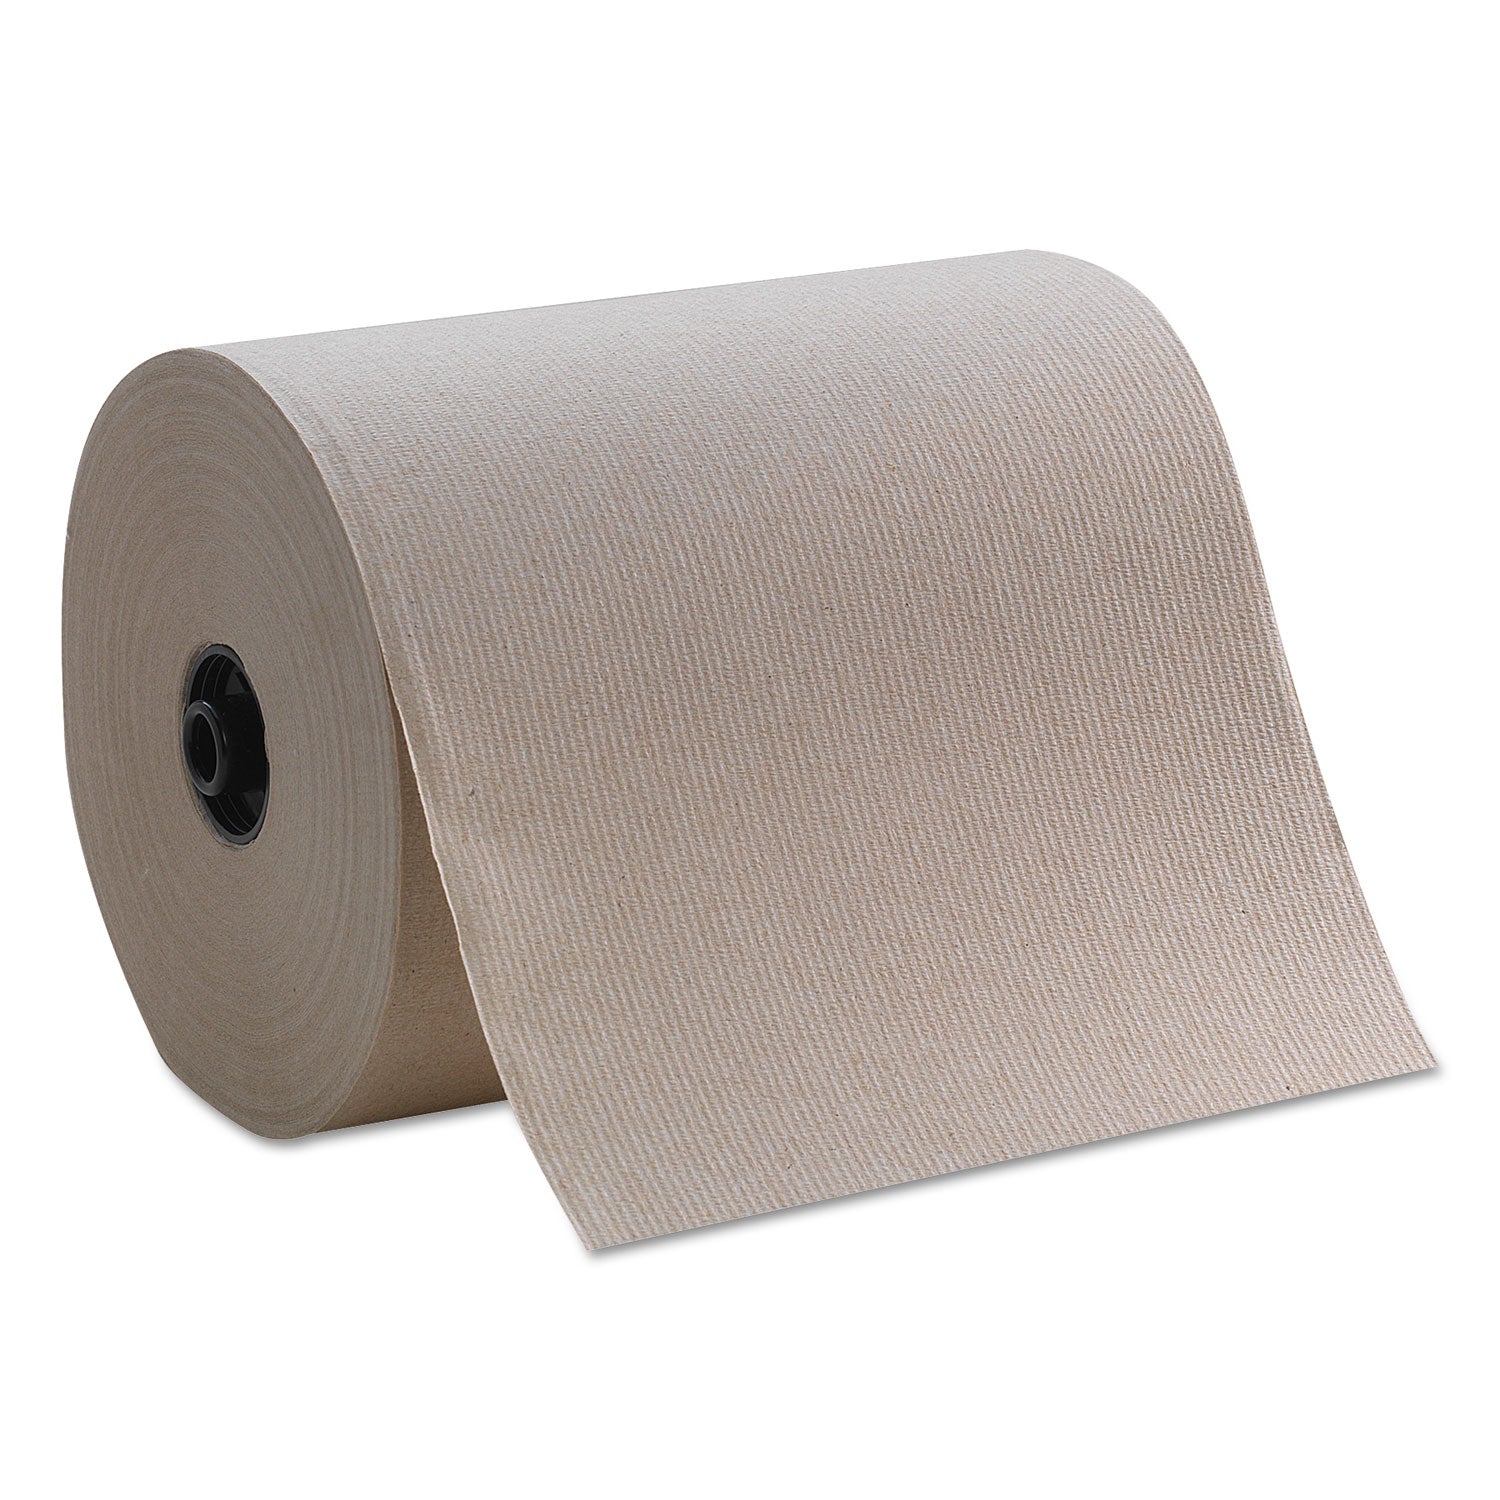 enMotion Flex Recycled Paper Towel Rolls - 550 Sheets/Roll - Brown - For Hand - 6 Rolls Per Case - 6 / Carton - 1